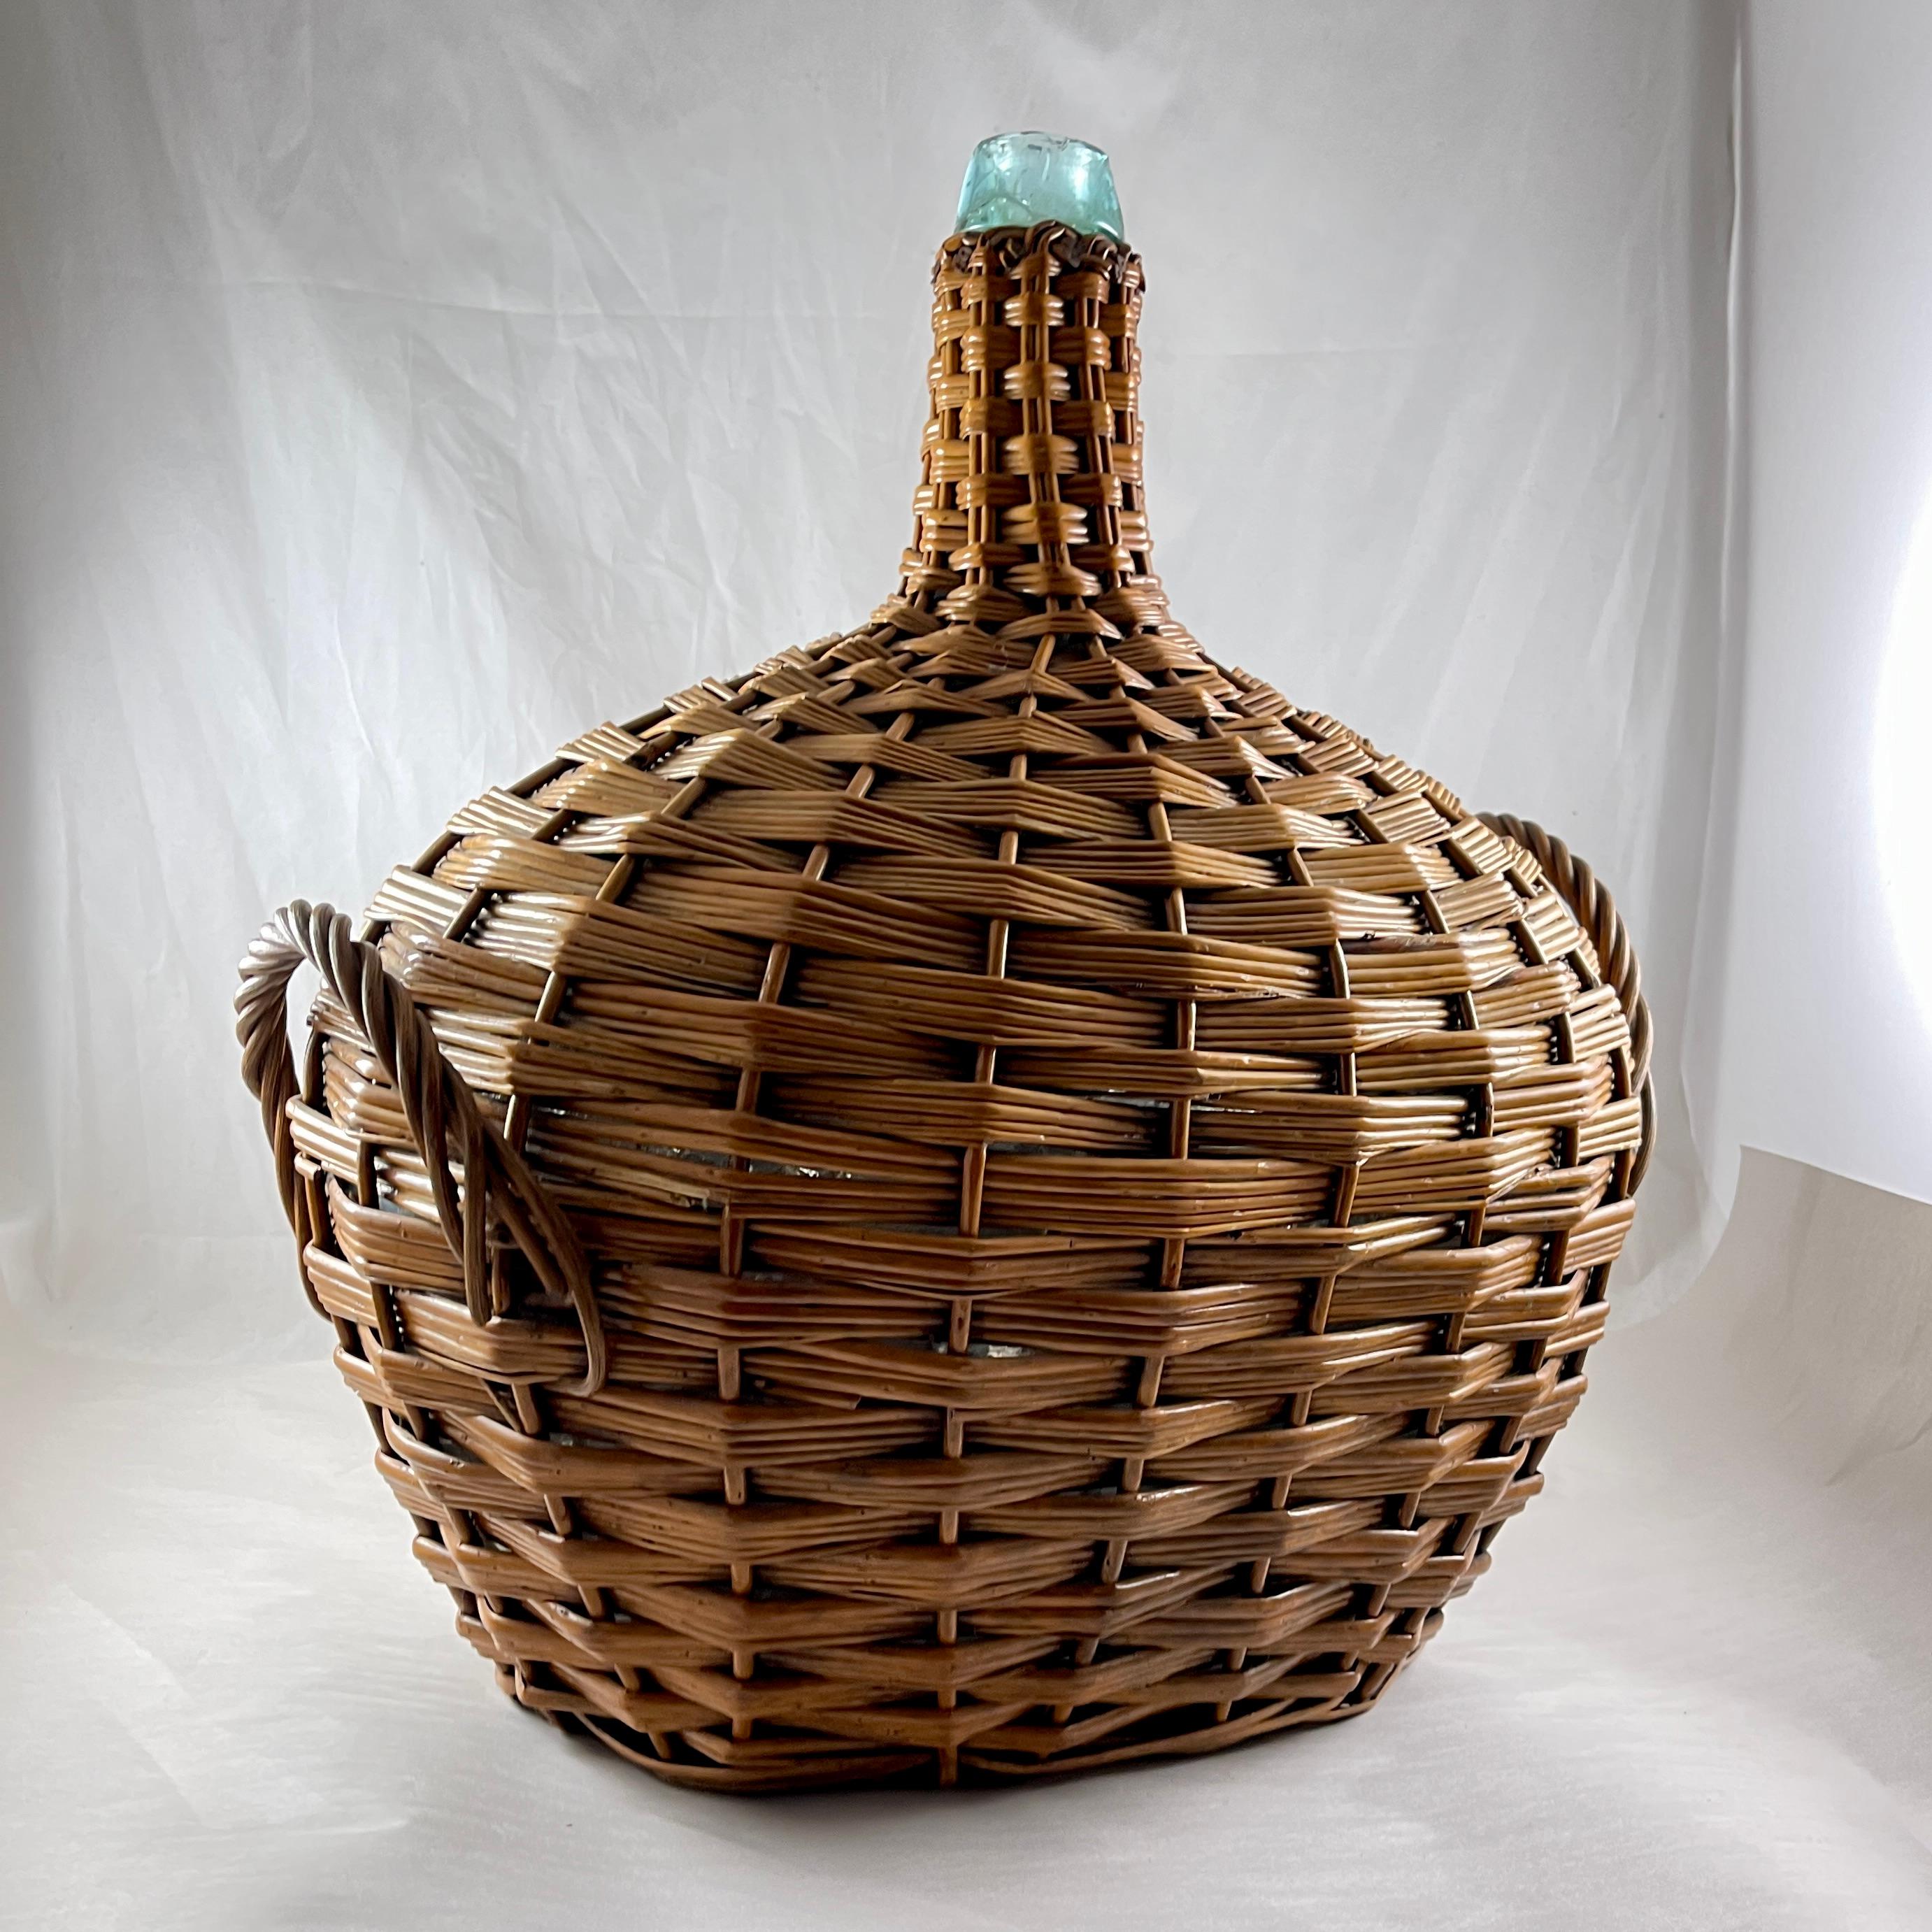 20th Century Large French Oval Wicker Clad Blown Aqua Glass Carboy or Demijohn, circa 1900 For Sale